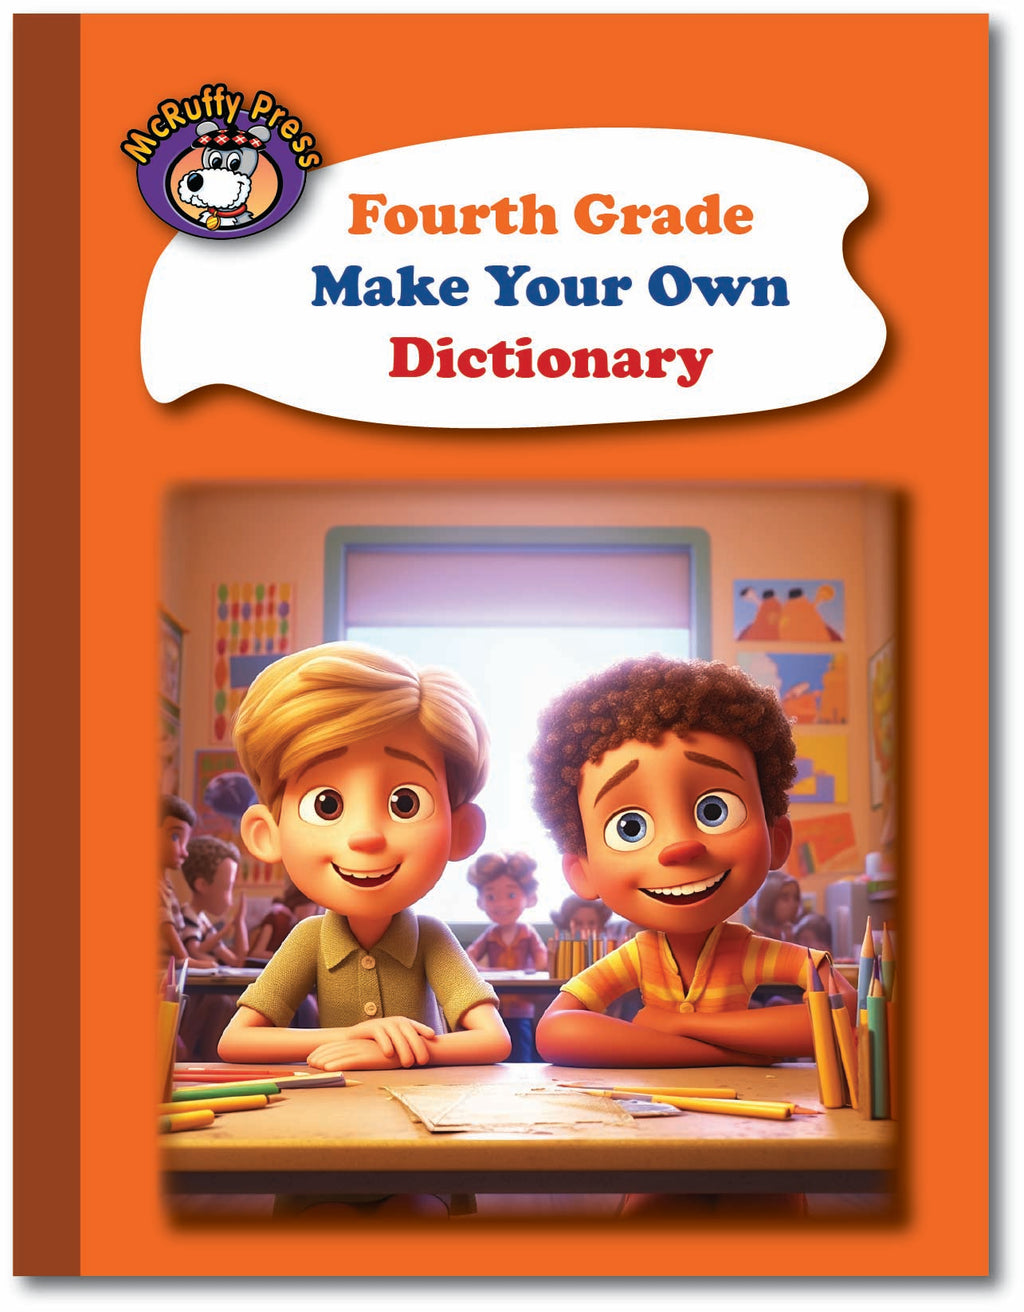 Fourth Grade Make Your Own Dictionary